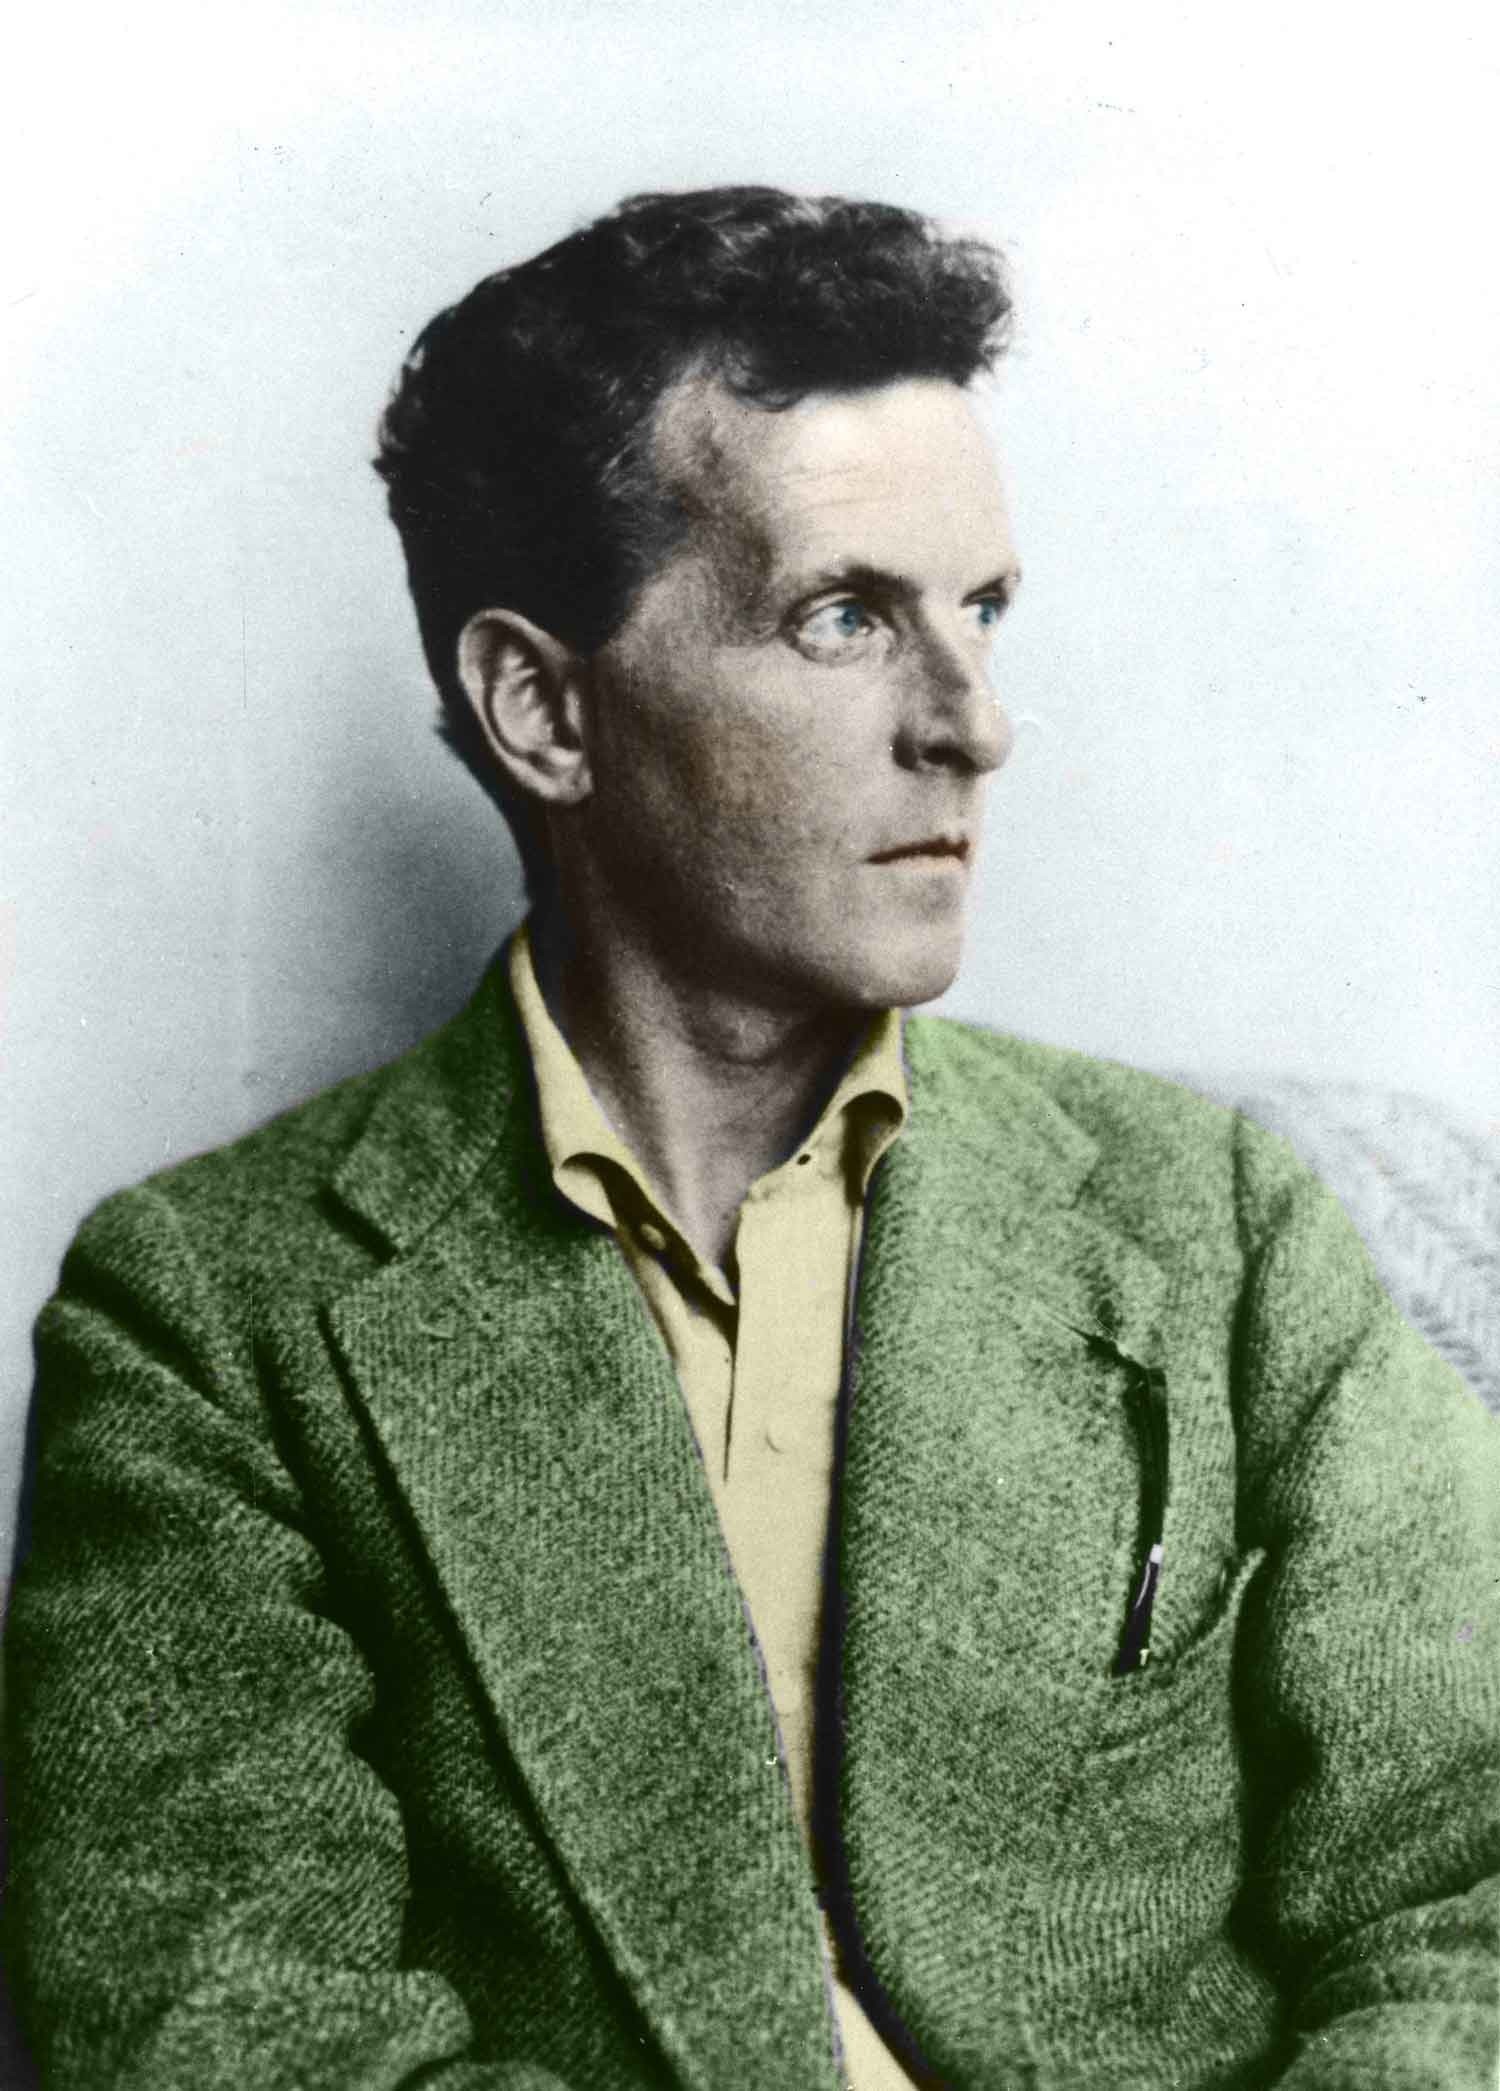 what nationality was ludwig wittgenstein?